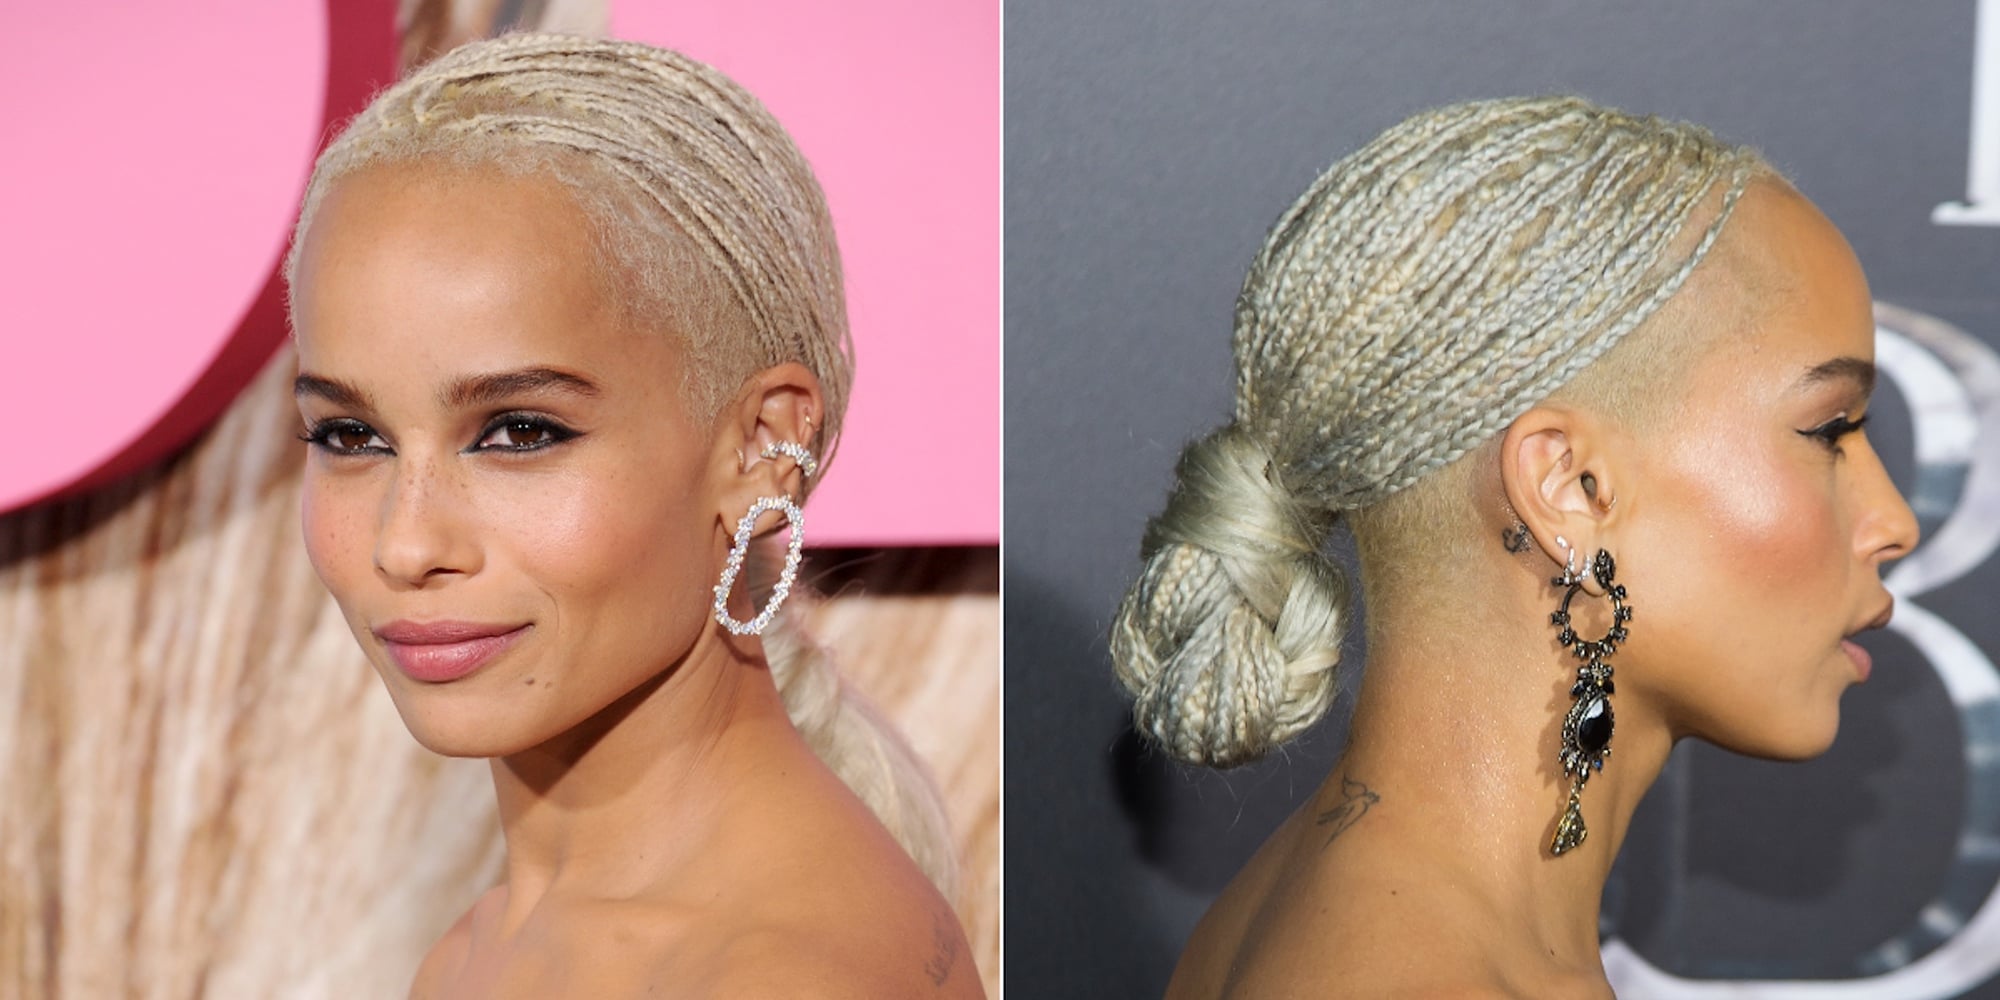 Tree Braids Are the Latest ’90s Hairstyle to Make a Comeback